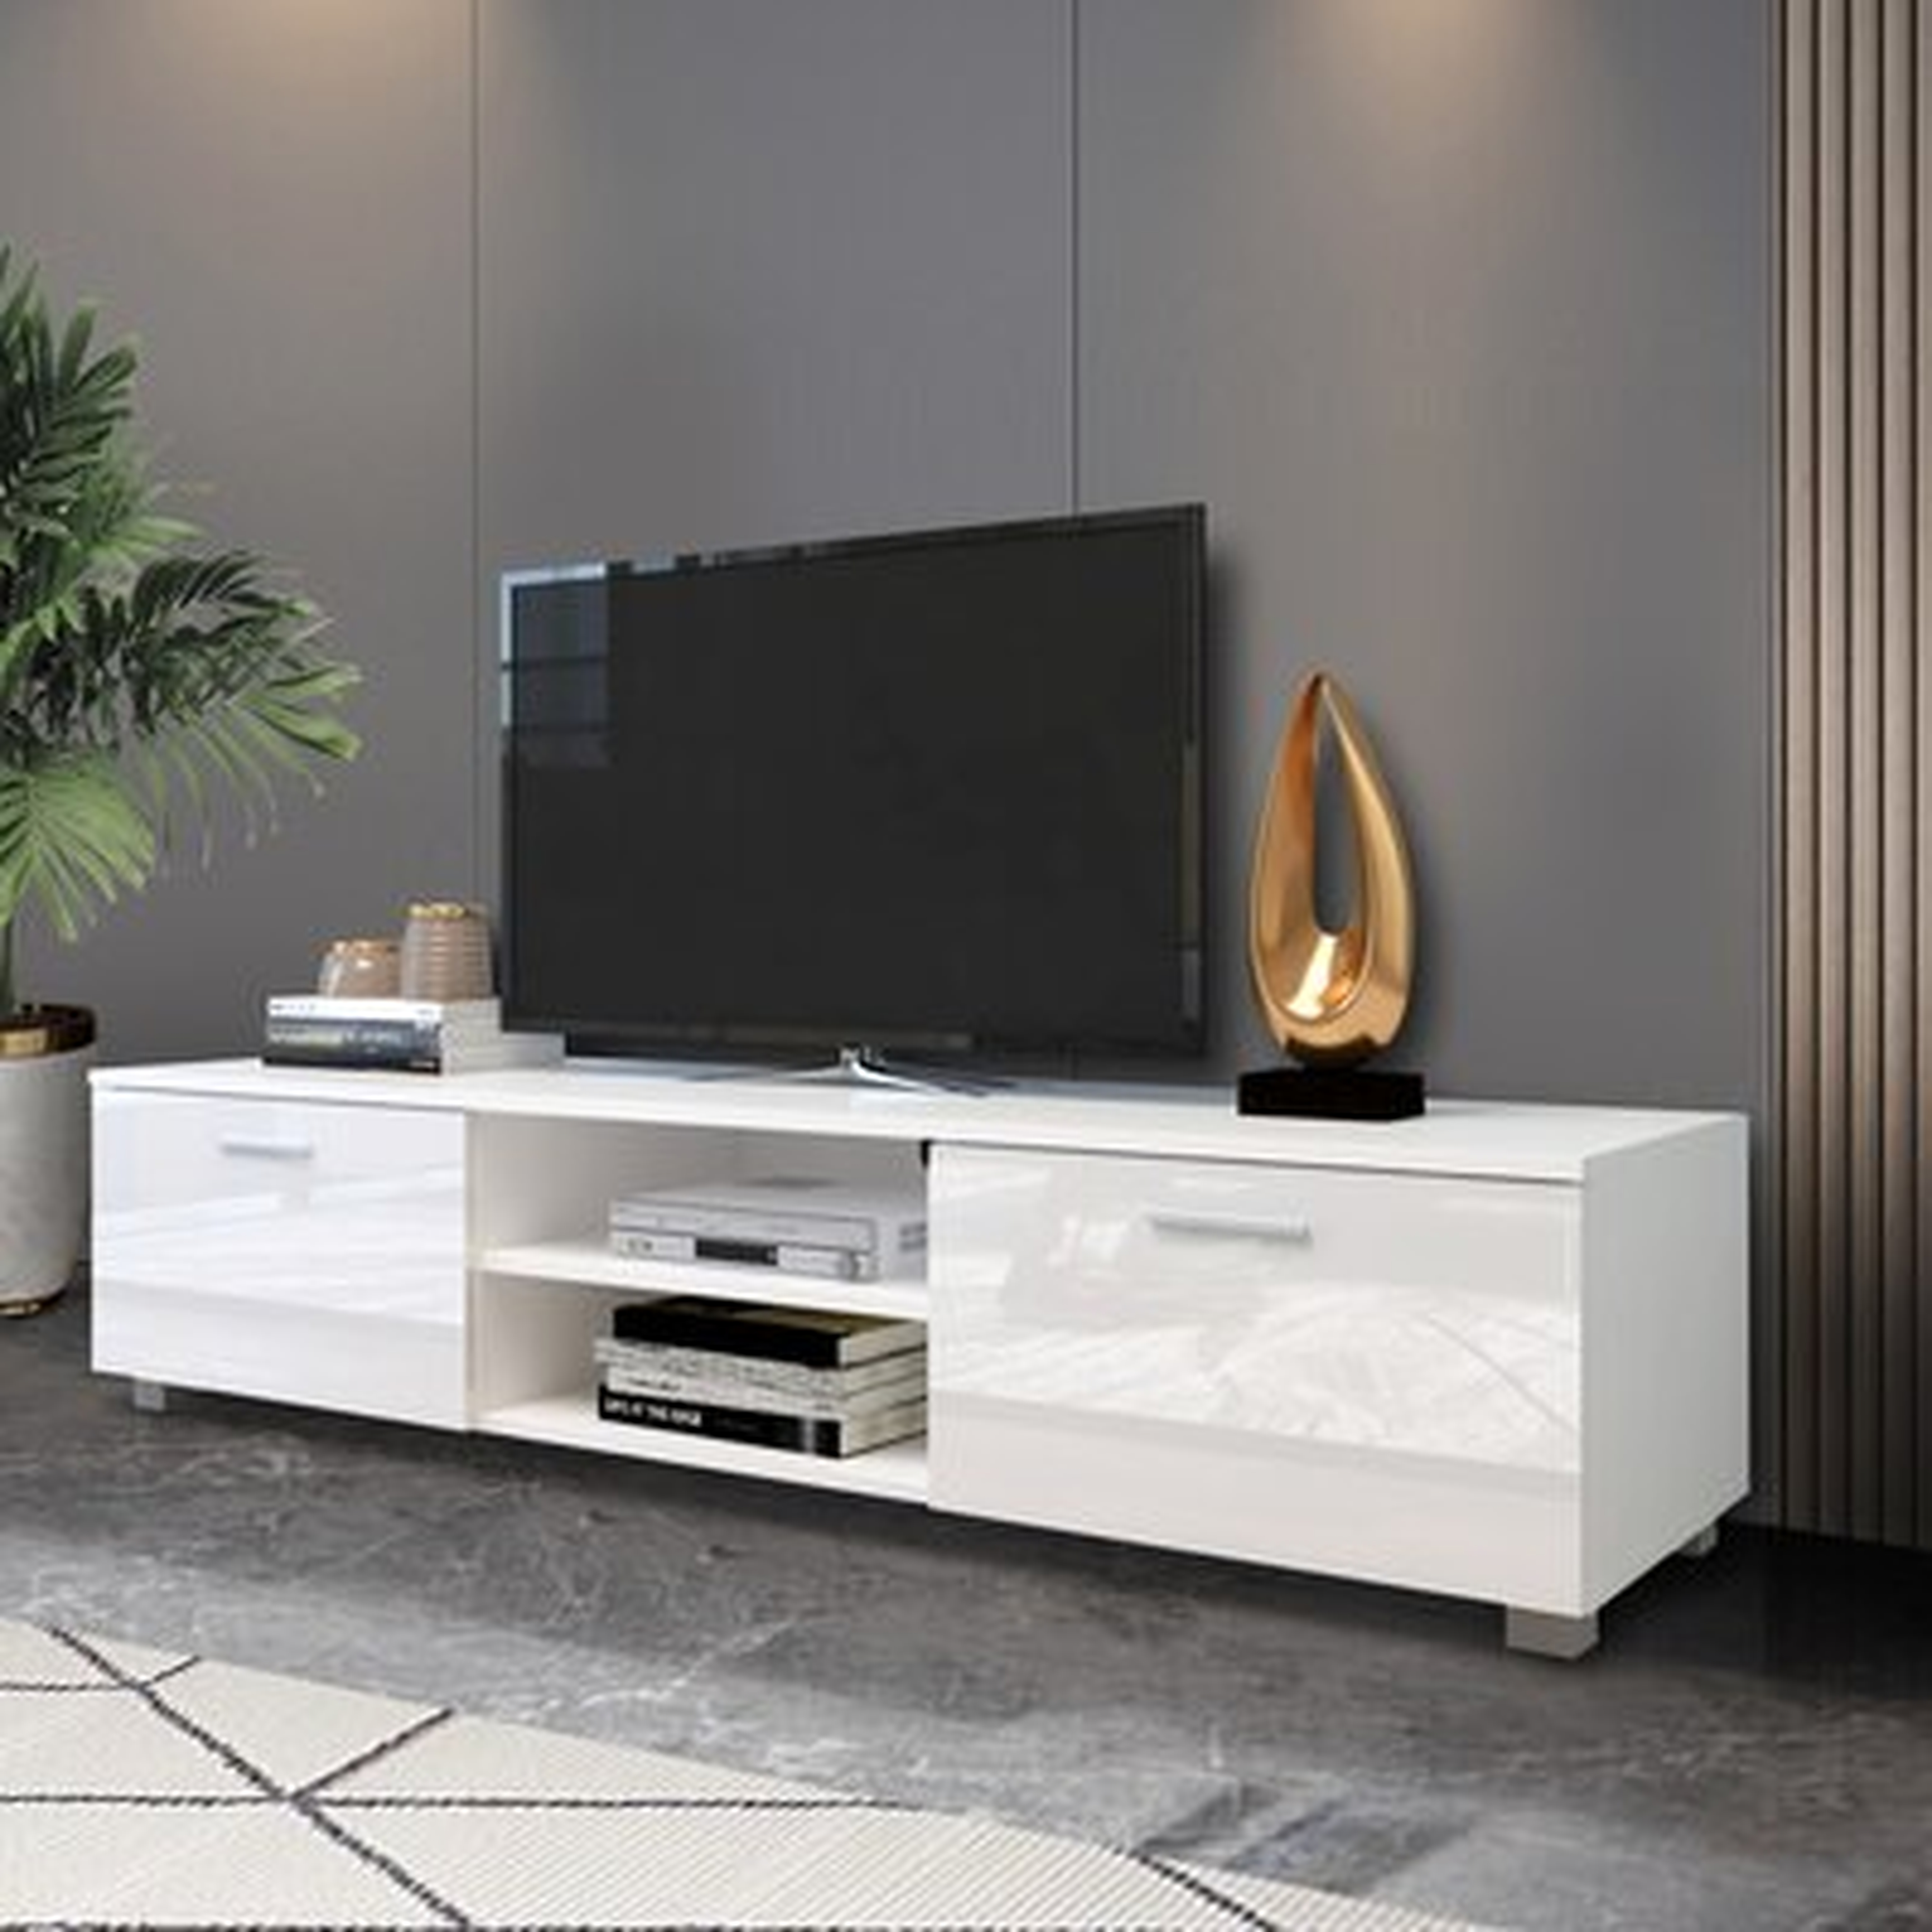 TV Cabinet TV Stands, Media Console Entertainment Center Television Table, 2 Storage Cabinet With Open Shelves, White - Wayfair